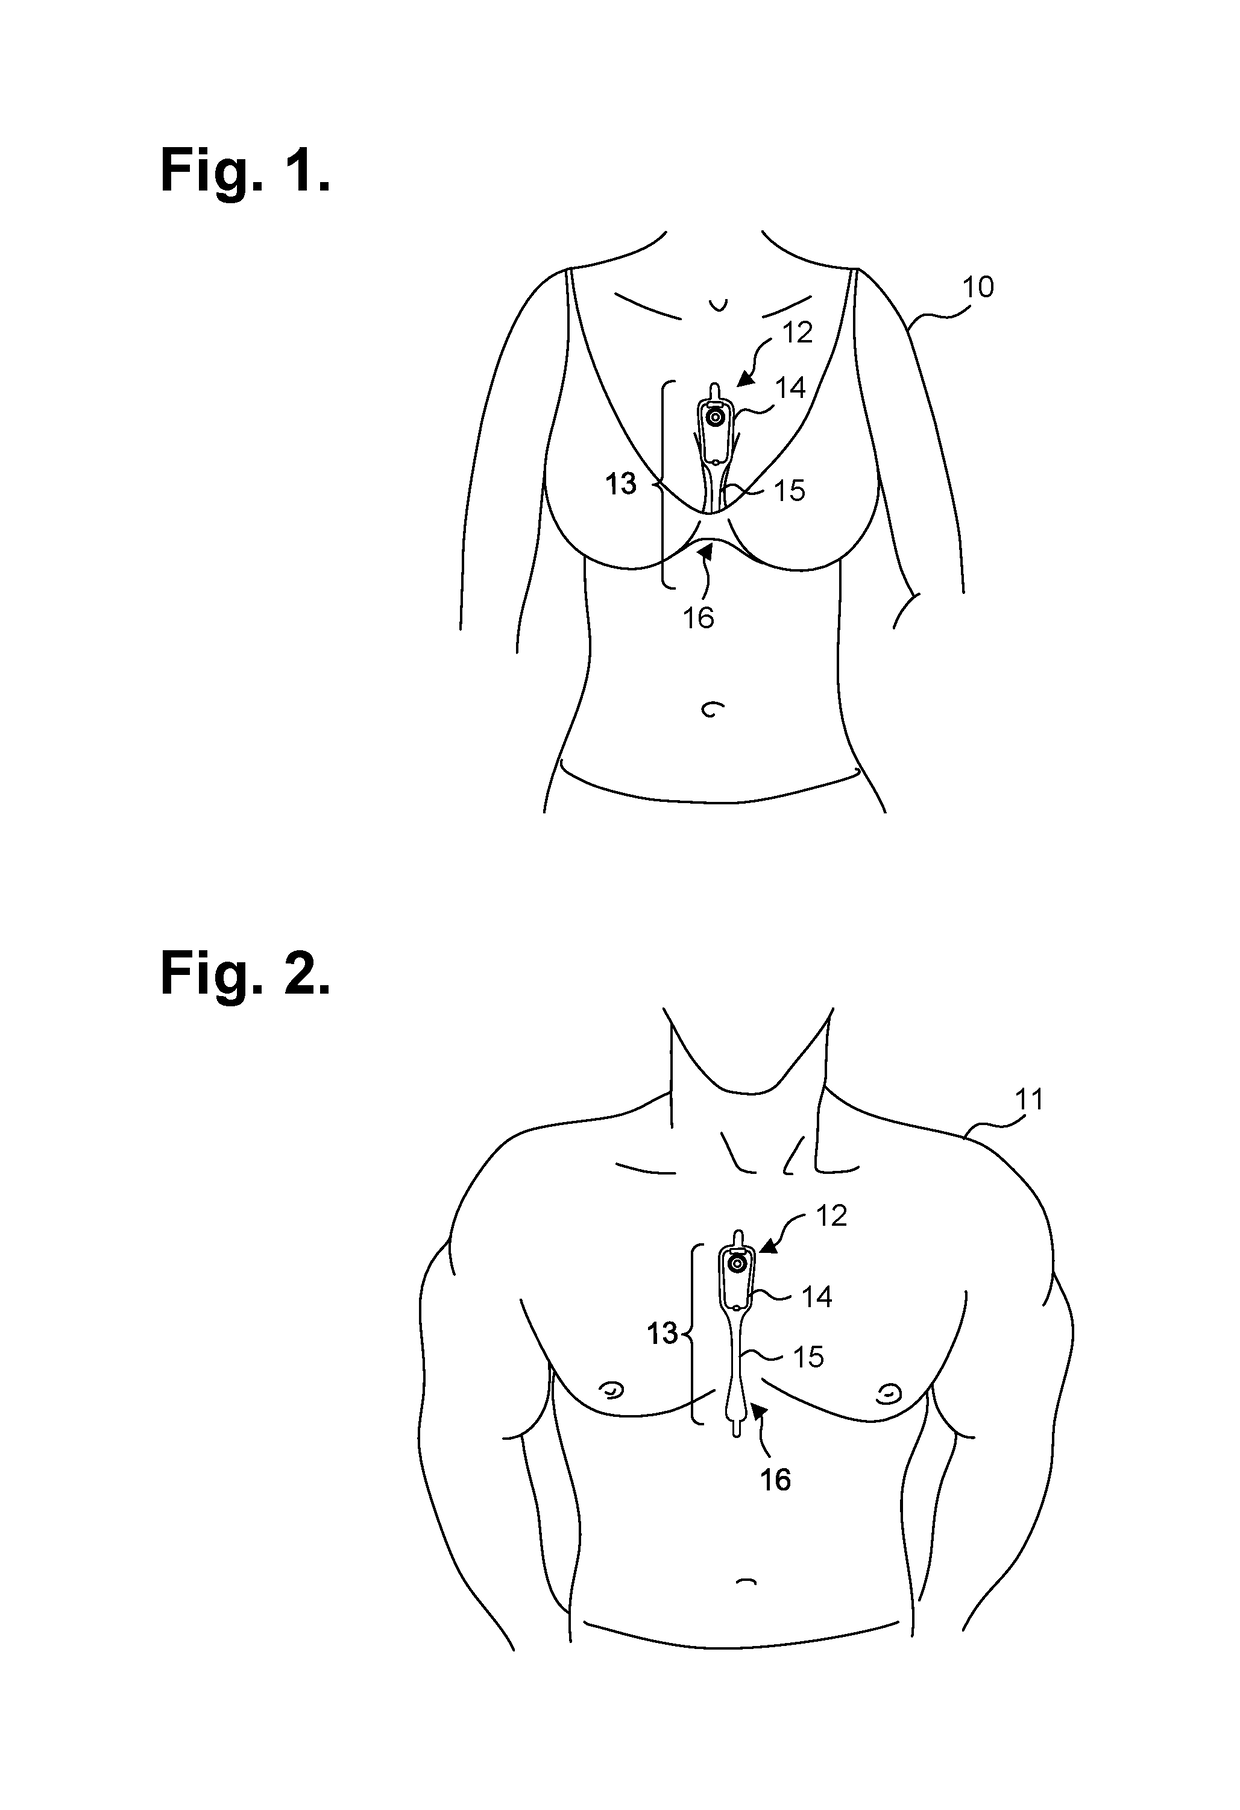 Computer-implemented system and method for providing a personal mobile device-triggered medical intervention